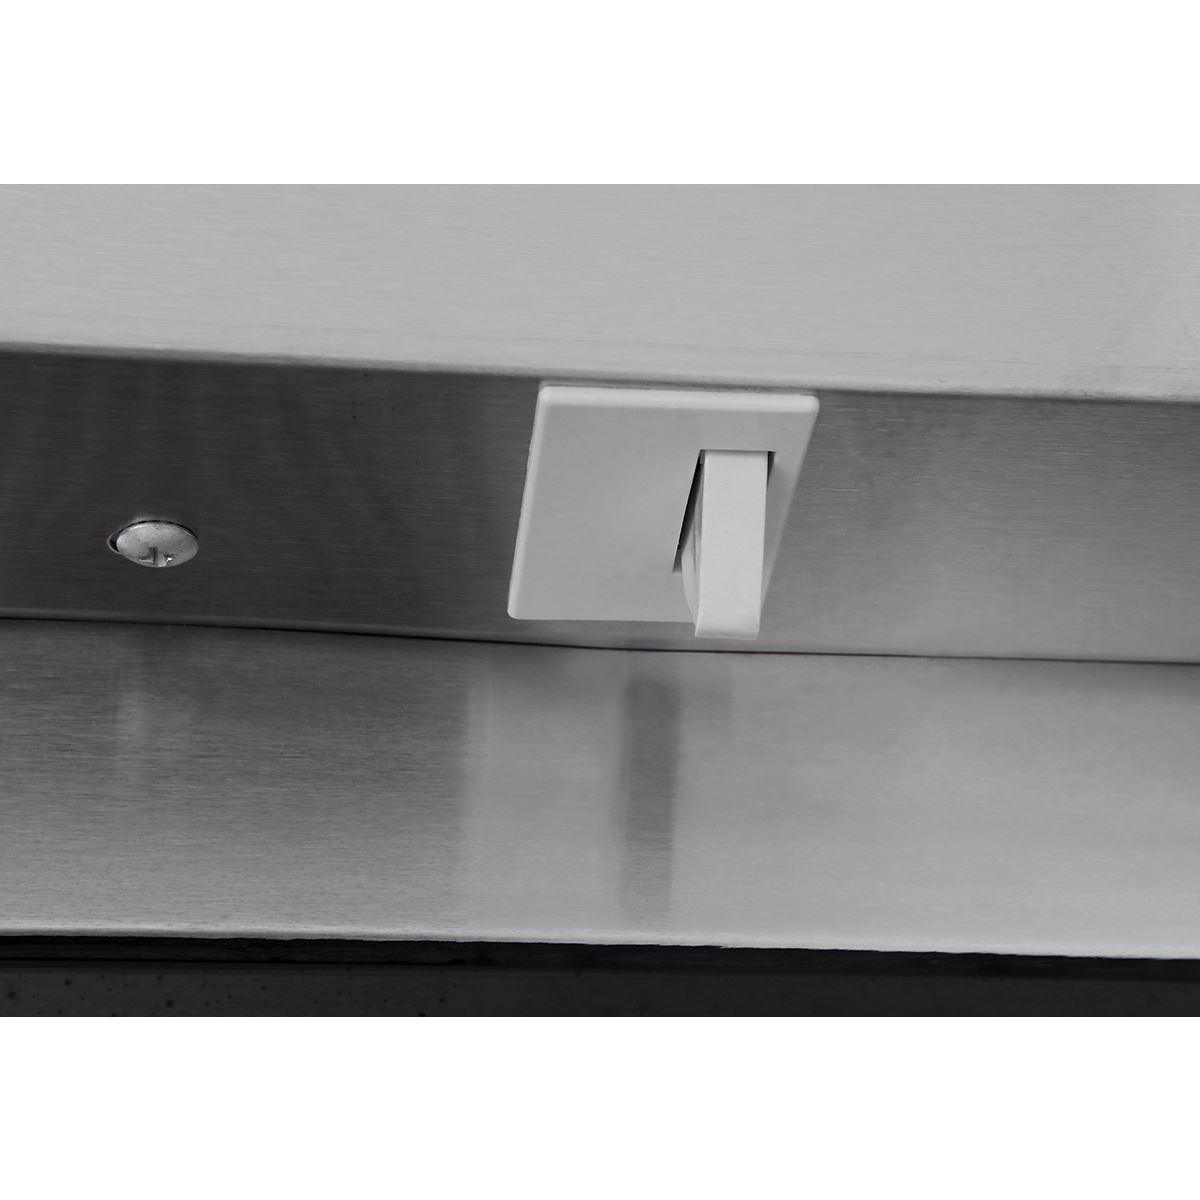 Atosa MBF8004GR One Door 29" Upright Reach-In Refrigerator Top Mount Series - TheChefStore.Com